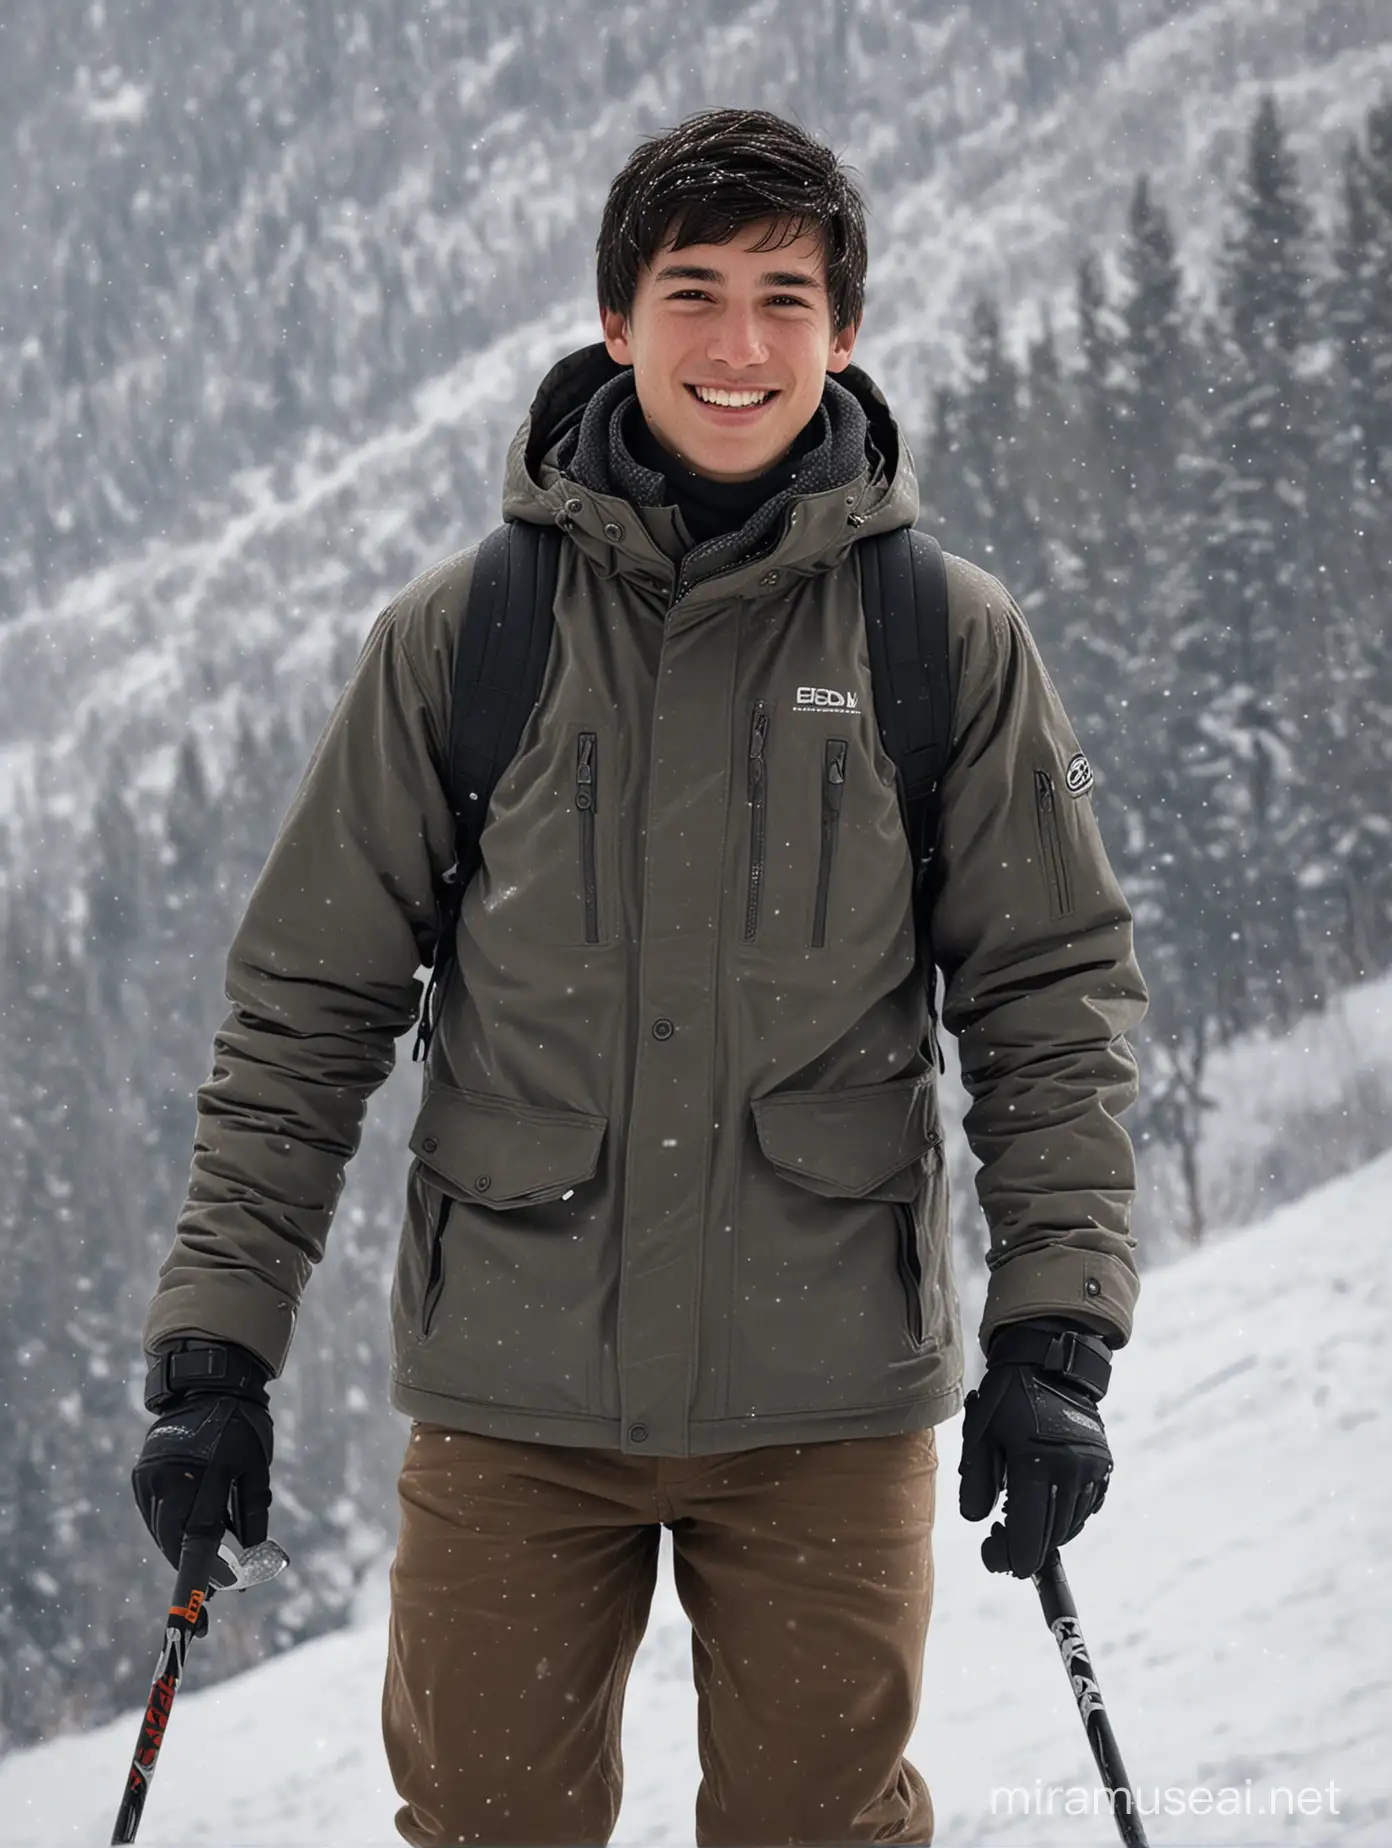 photo of a young man, 18 year old, oval face, of riding position for a picture on a snowy mountain, he is riding down the slope, he has short black haircut, he is smiling, snowy weather, cold winter evening, ski gear [consistent facial and body proportions, aesthetic design and intricate composition, refined body details, natural beauty, realism, authenticity, photorealistic, accurate colors and shades, true tone representation, authentic shadows, sharp focus, fine details, high resolution scene, subtle lighting and highlights, texture fidelity]photo of a young man, 18 year old, oval face, of riding position for a picture on a snowy mountain, he is riding down the slope, he has short black haircut, he is smiling, snowy weather, cold winter evening, ski gear [consistent facial and body proportions, aesthetic design and intricate composition, refined body details, natural beauty, realism, authenticity, photorealistic, accurate colors and shades, true tone representation, authentic shadows, sharp focus, fine details, high resolution scene, subtle lighting and highlights, texture fidelity]